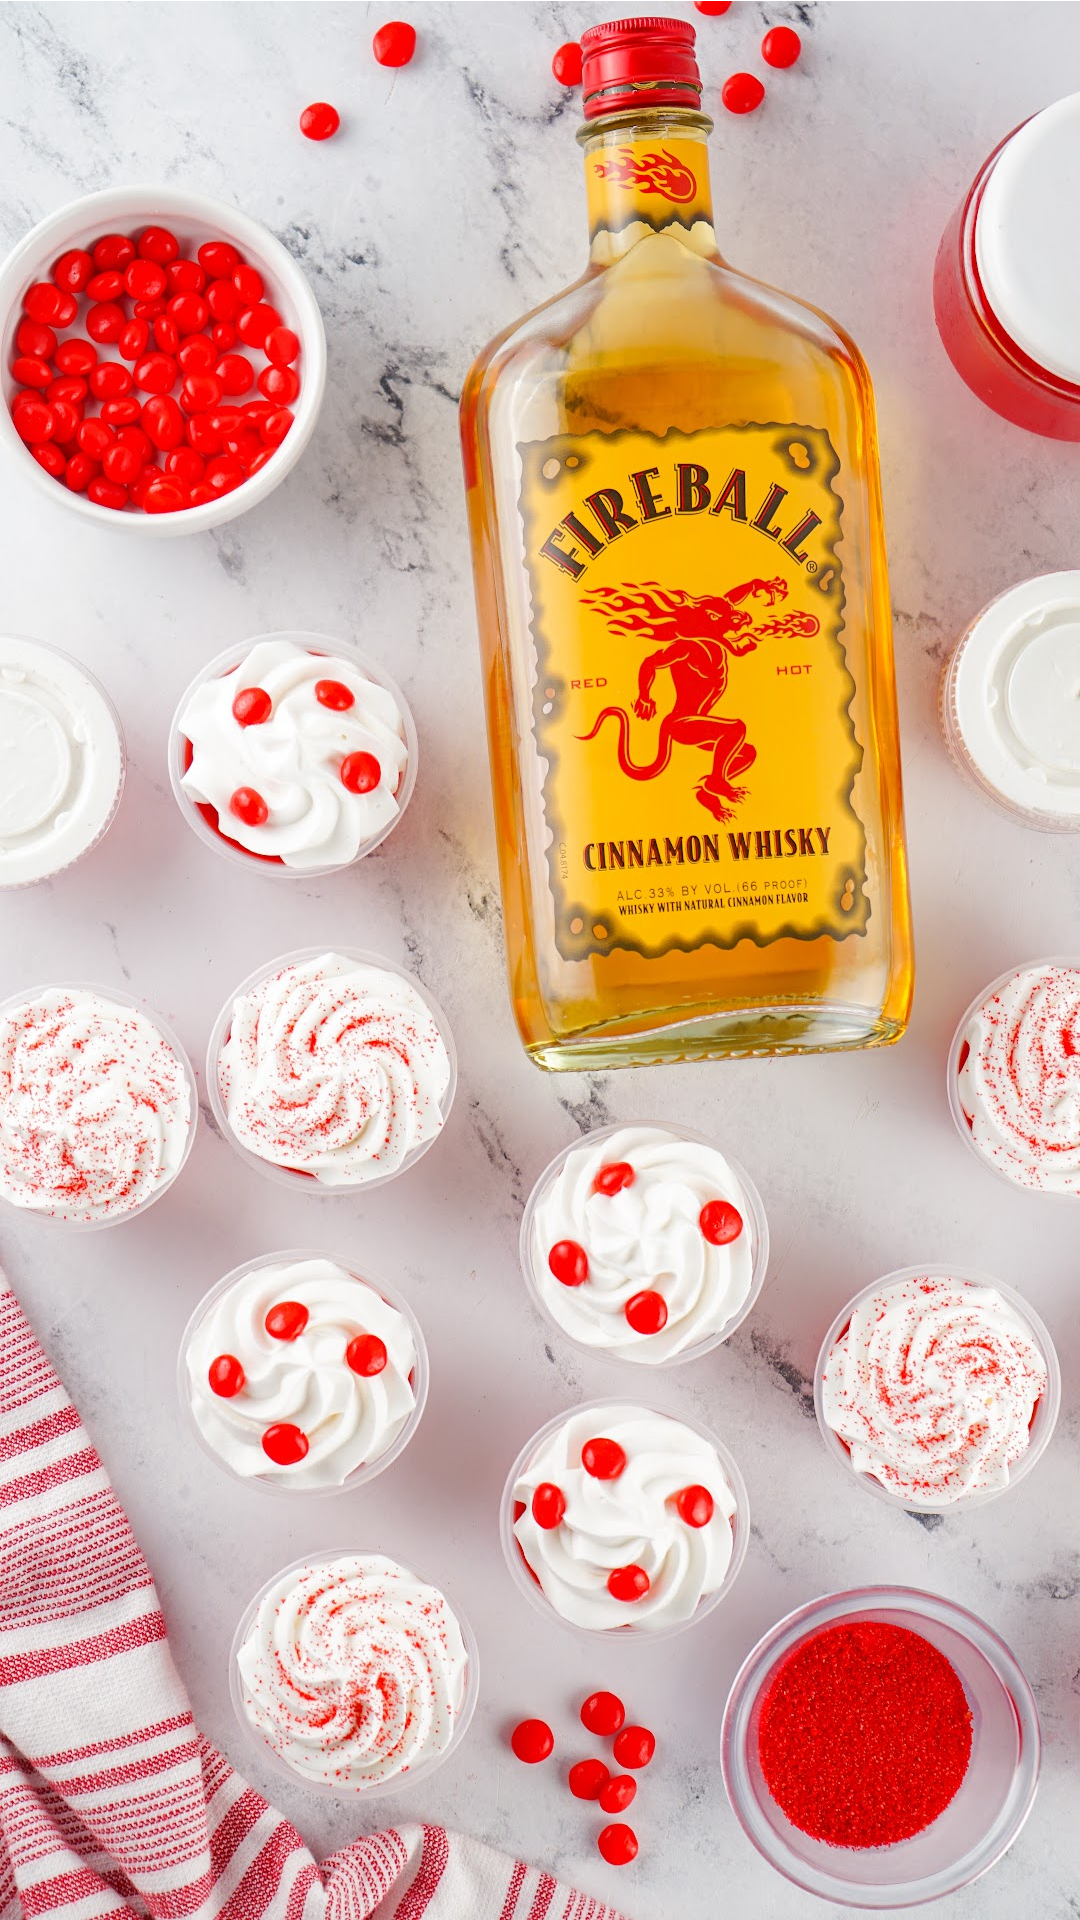 Looking down from above on Red fireball jello shots with a bottle of Fireball. Topped with whipped cream and red hot candy and red sprinkles.